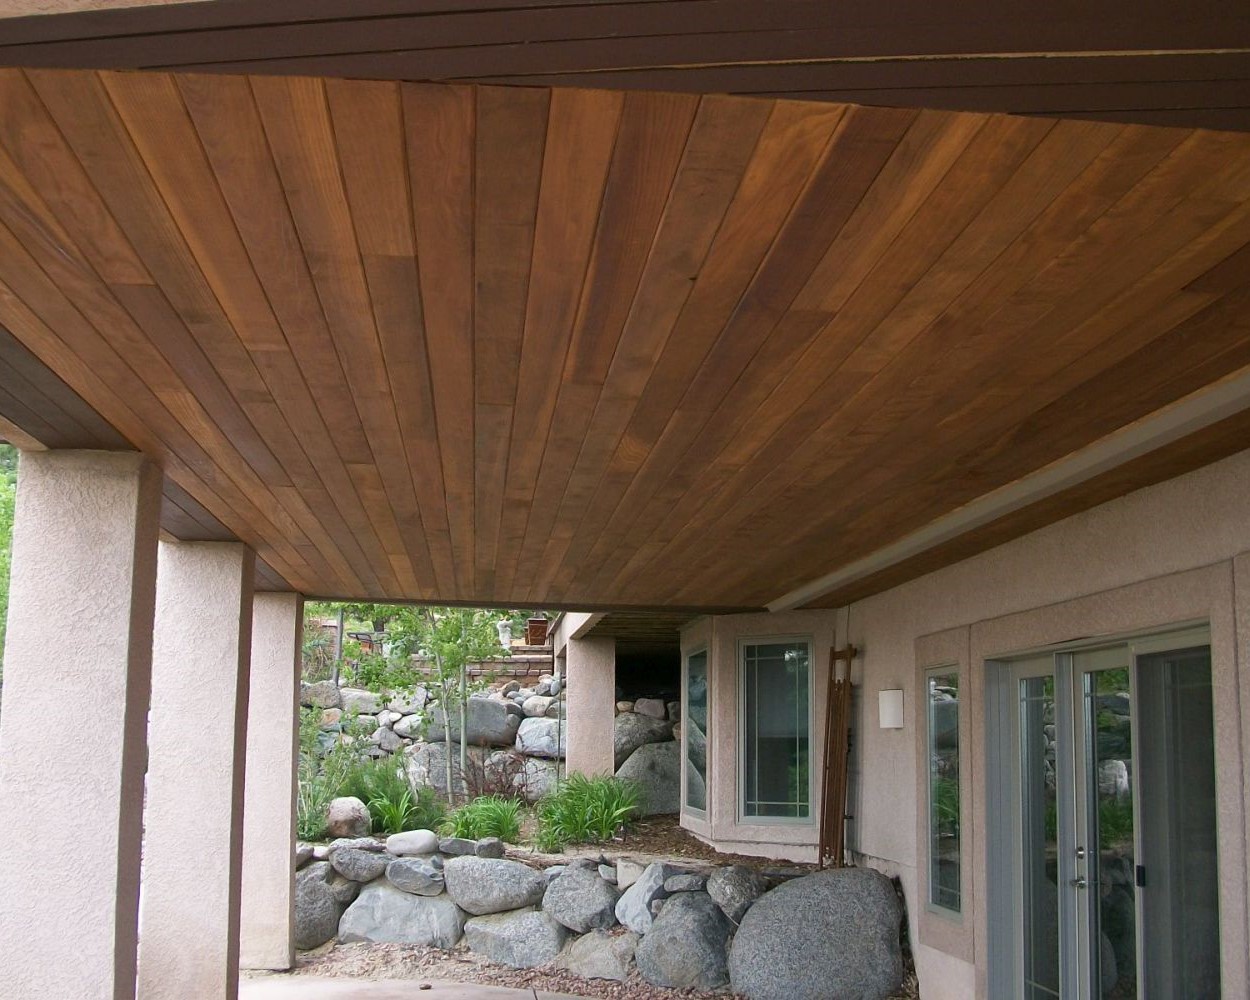 An under-deck drainage system with a redwood ceiling